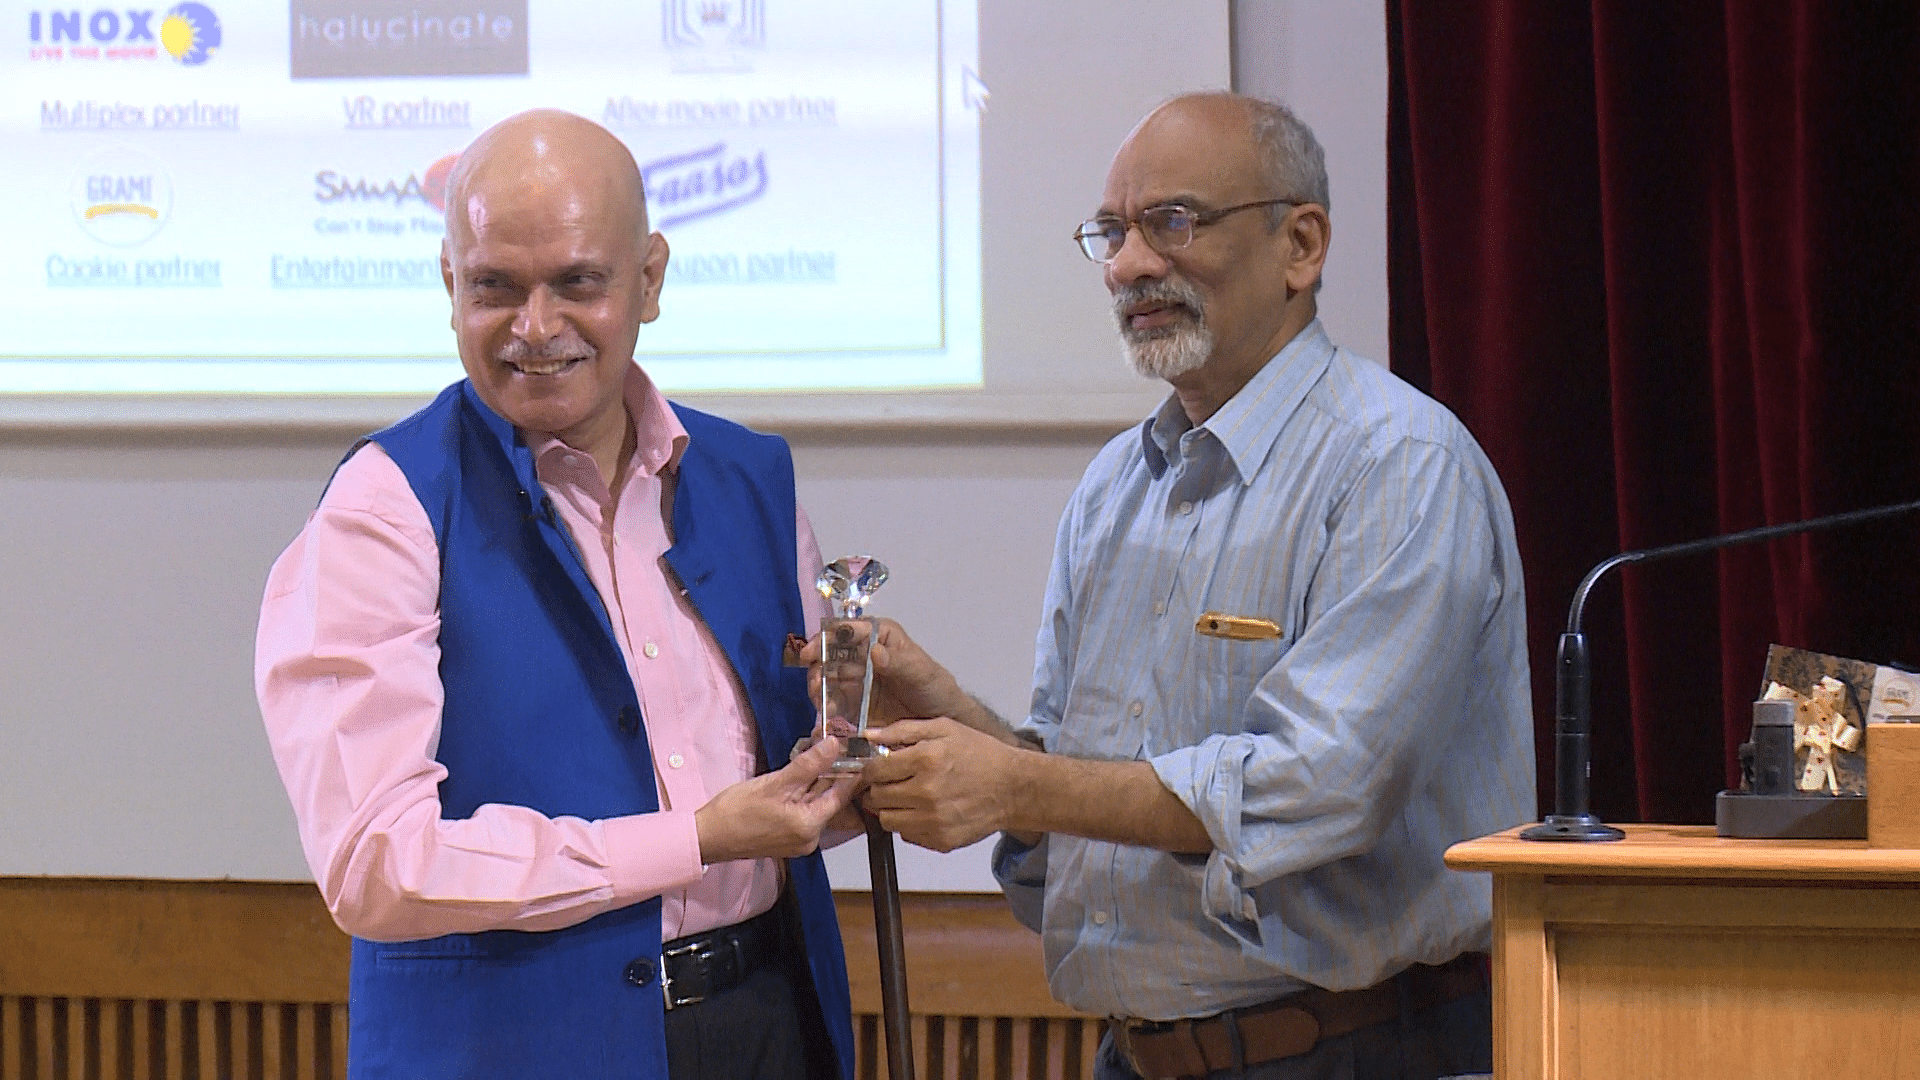 The Quint’s Editor-In-Chief Raghav Bahl imparted some important lessons on entrepreneurship at IIM Bangalore.